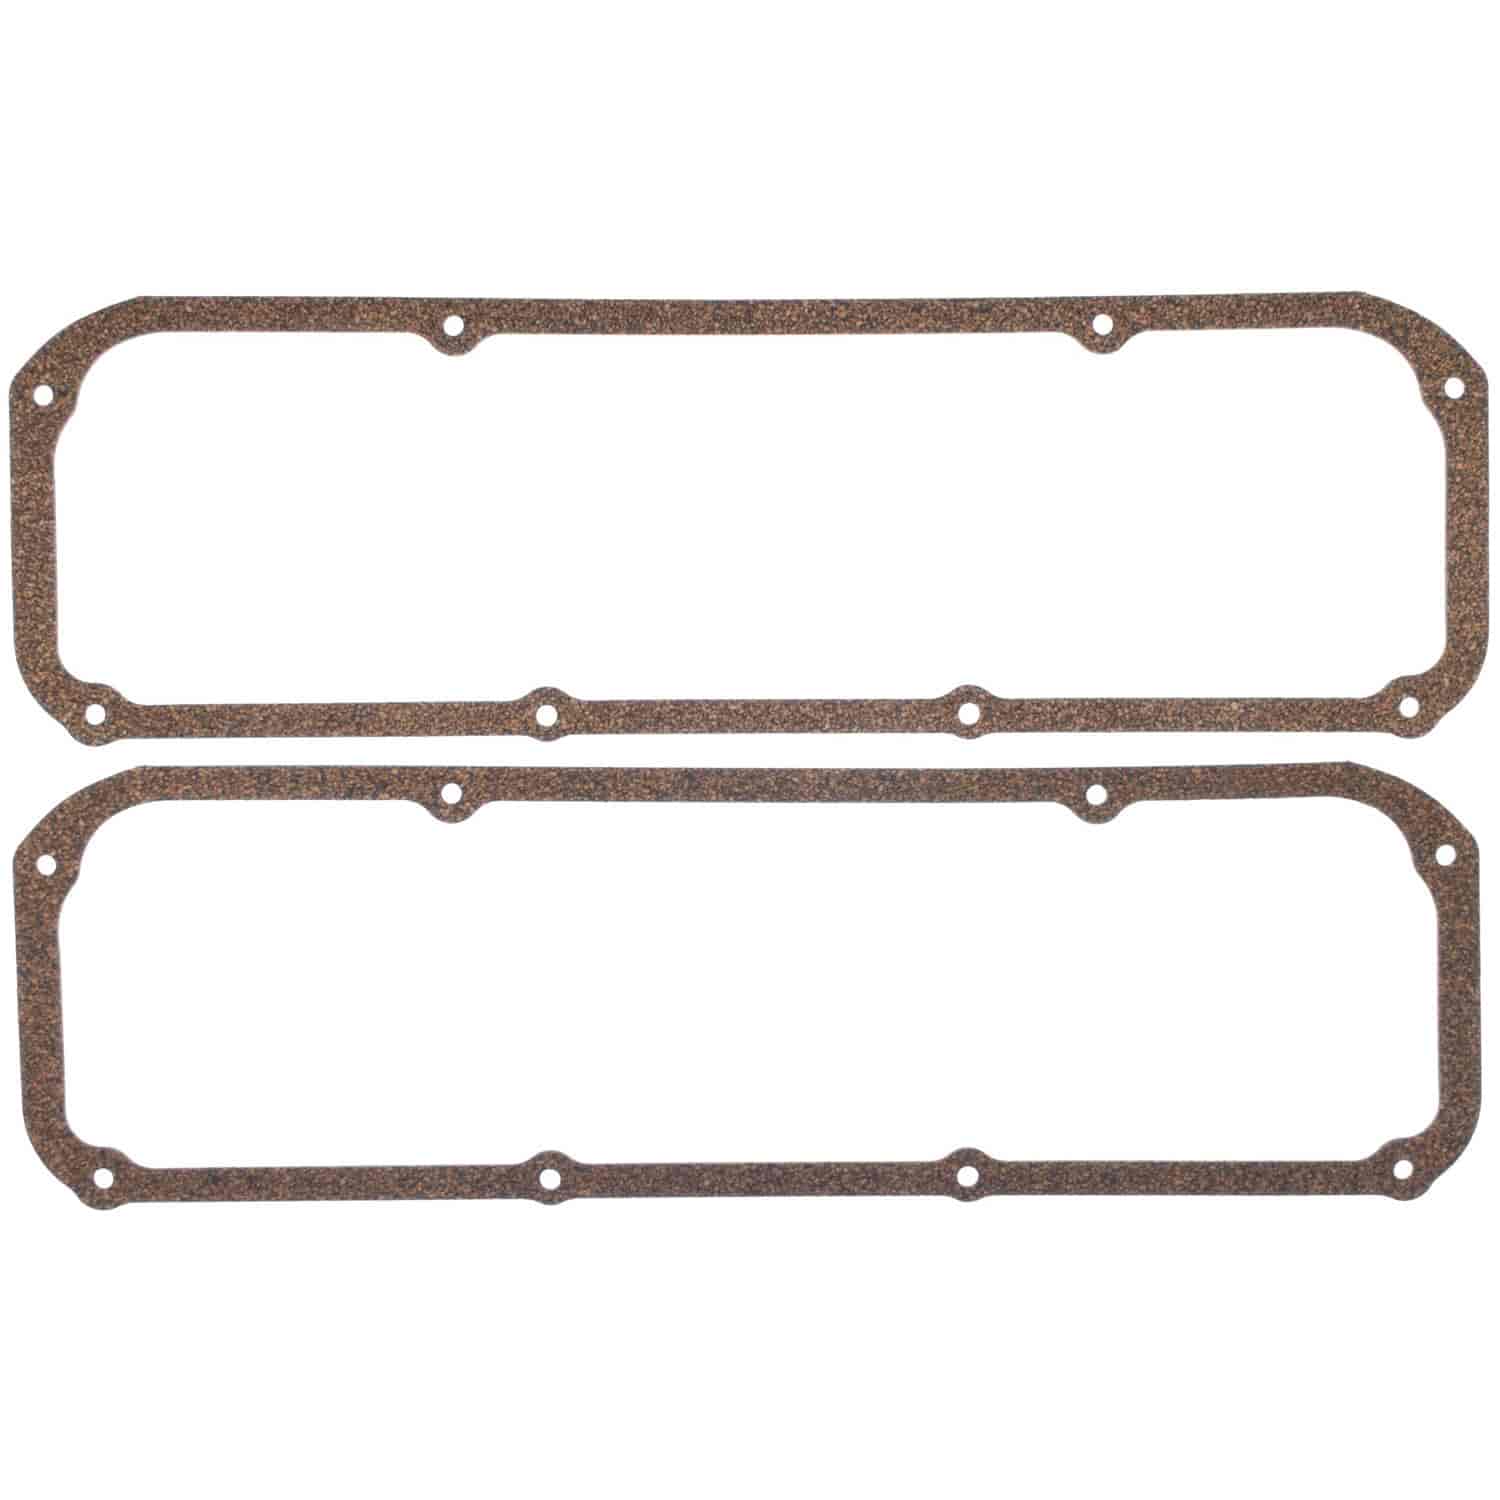 Valve Cover Gasket Set 1969-1982 Ford 351C/351M/400 in Cork-Rubber